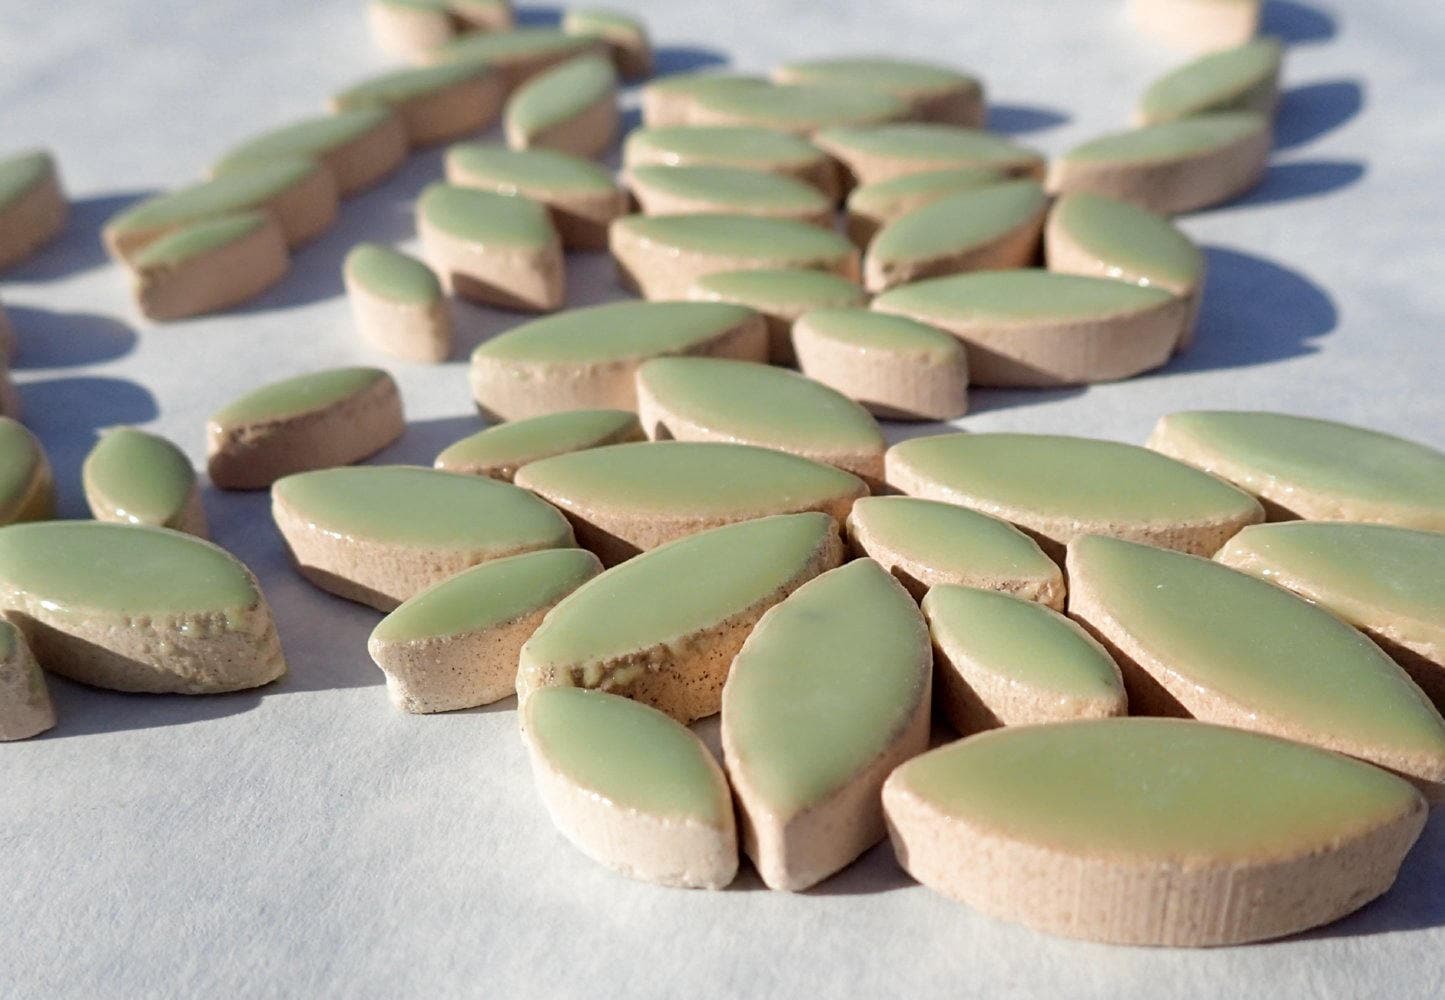 Pistachio Green Petals Mosaic Tiles - 50g Ceramic Leaves in Mix of 2 Sizes 1/2" and 3/4" - Muted Peppermint Green